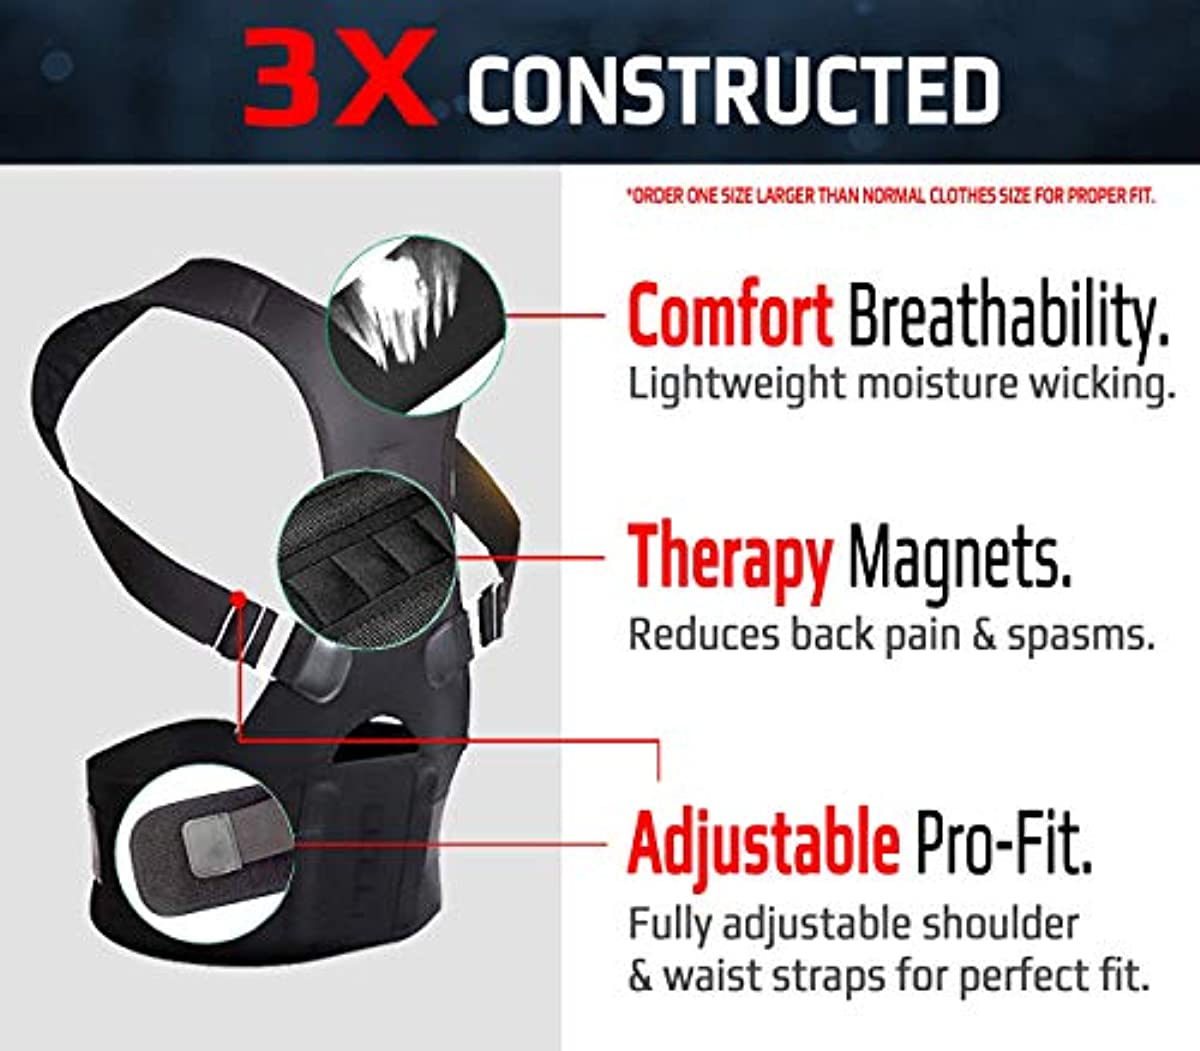 VPX Magnetic Posture Corrector Men & Women | Fully Adjustable Padded Back Supporter, Straightener, Trainer | All Day Pain Relief & Lumbar Support | Neck, Spine Stretcher, Shoulders Correction, Braces